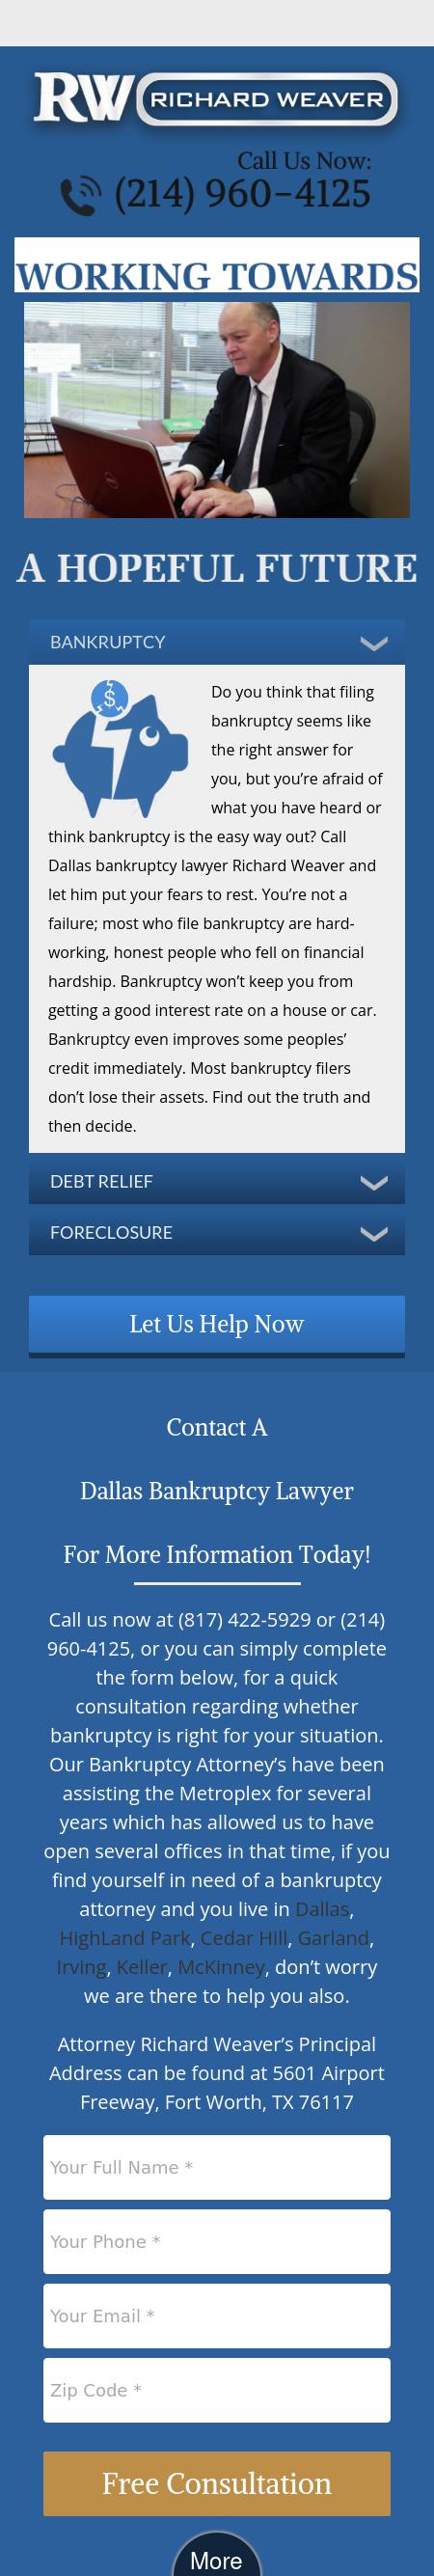 Bankruptcy Attorney Richard Weaver & Associates - Fort Worth TX Lawyers